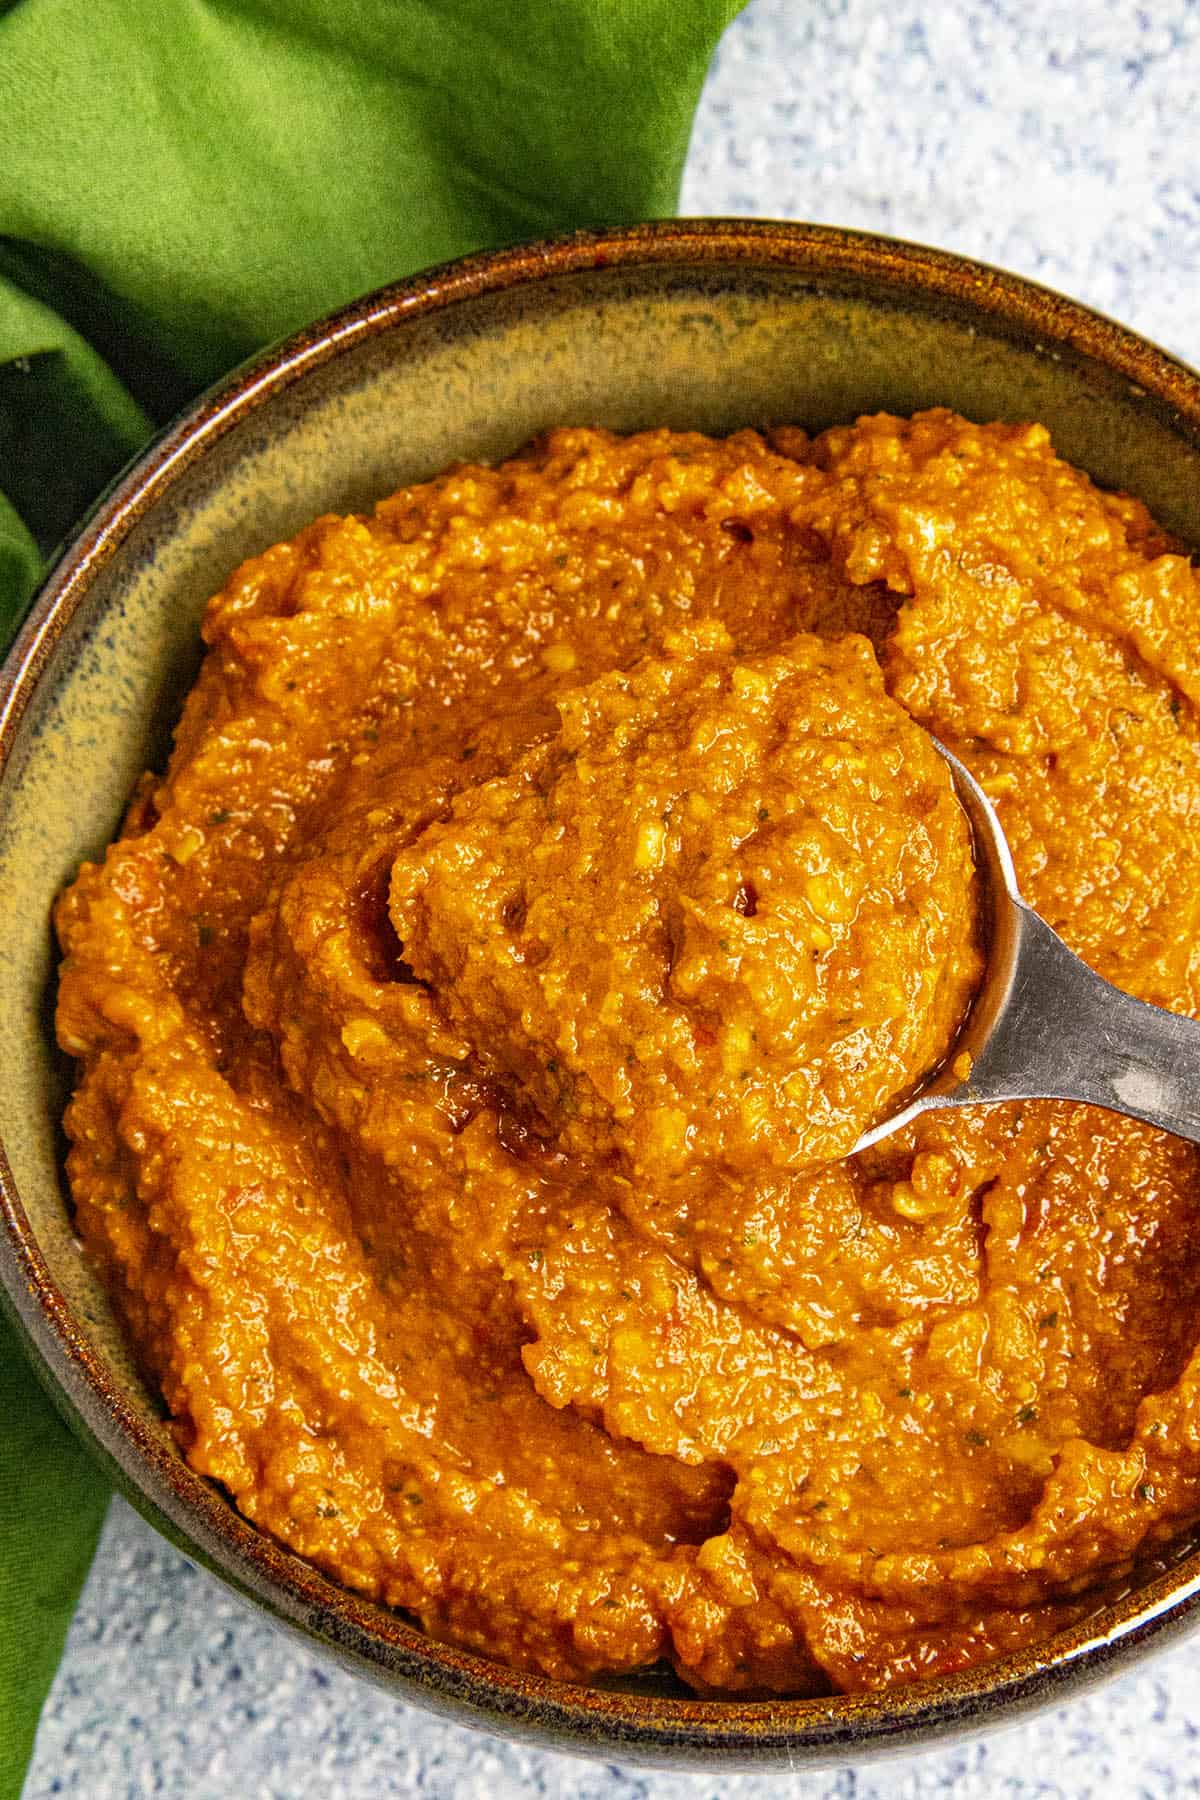 Red Curry Paste Recipe